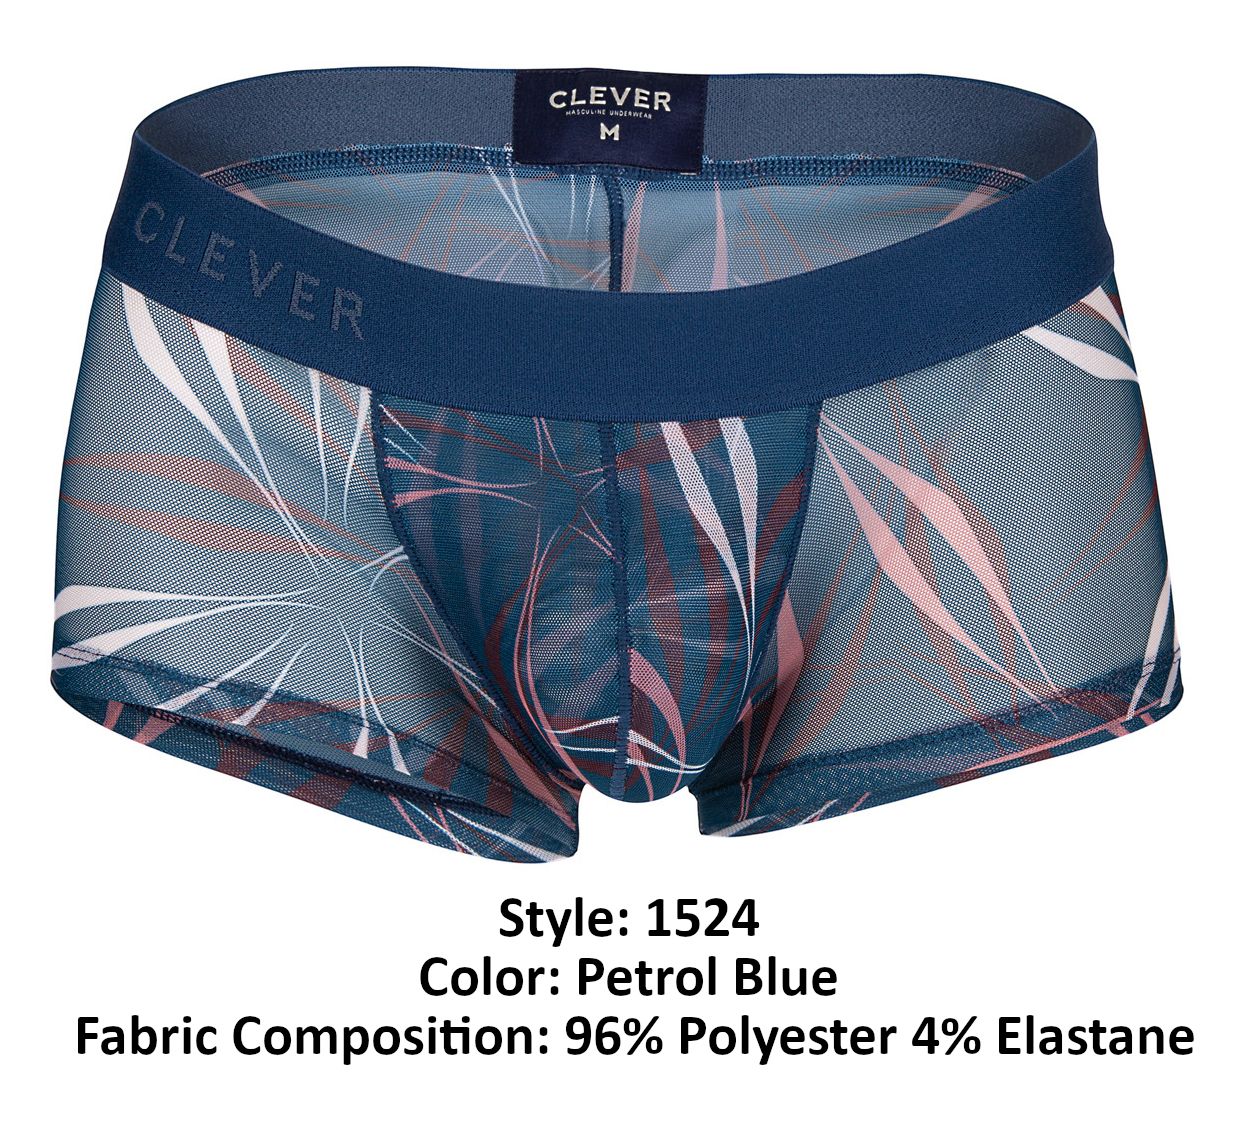 Clever 1524 Continental Trunks